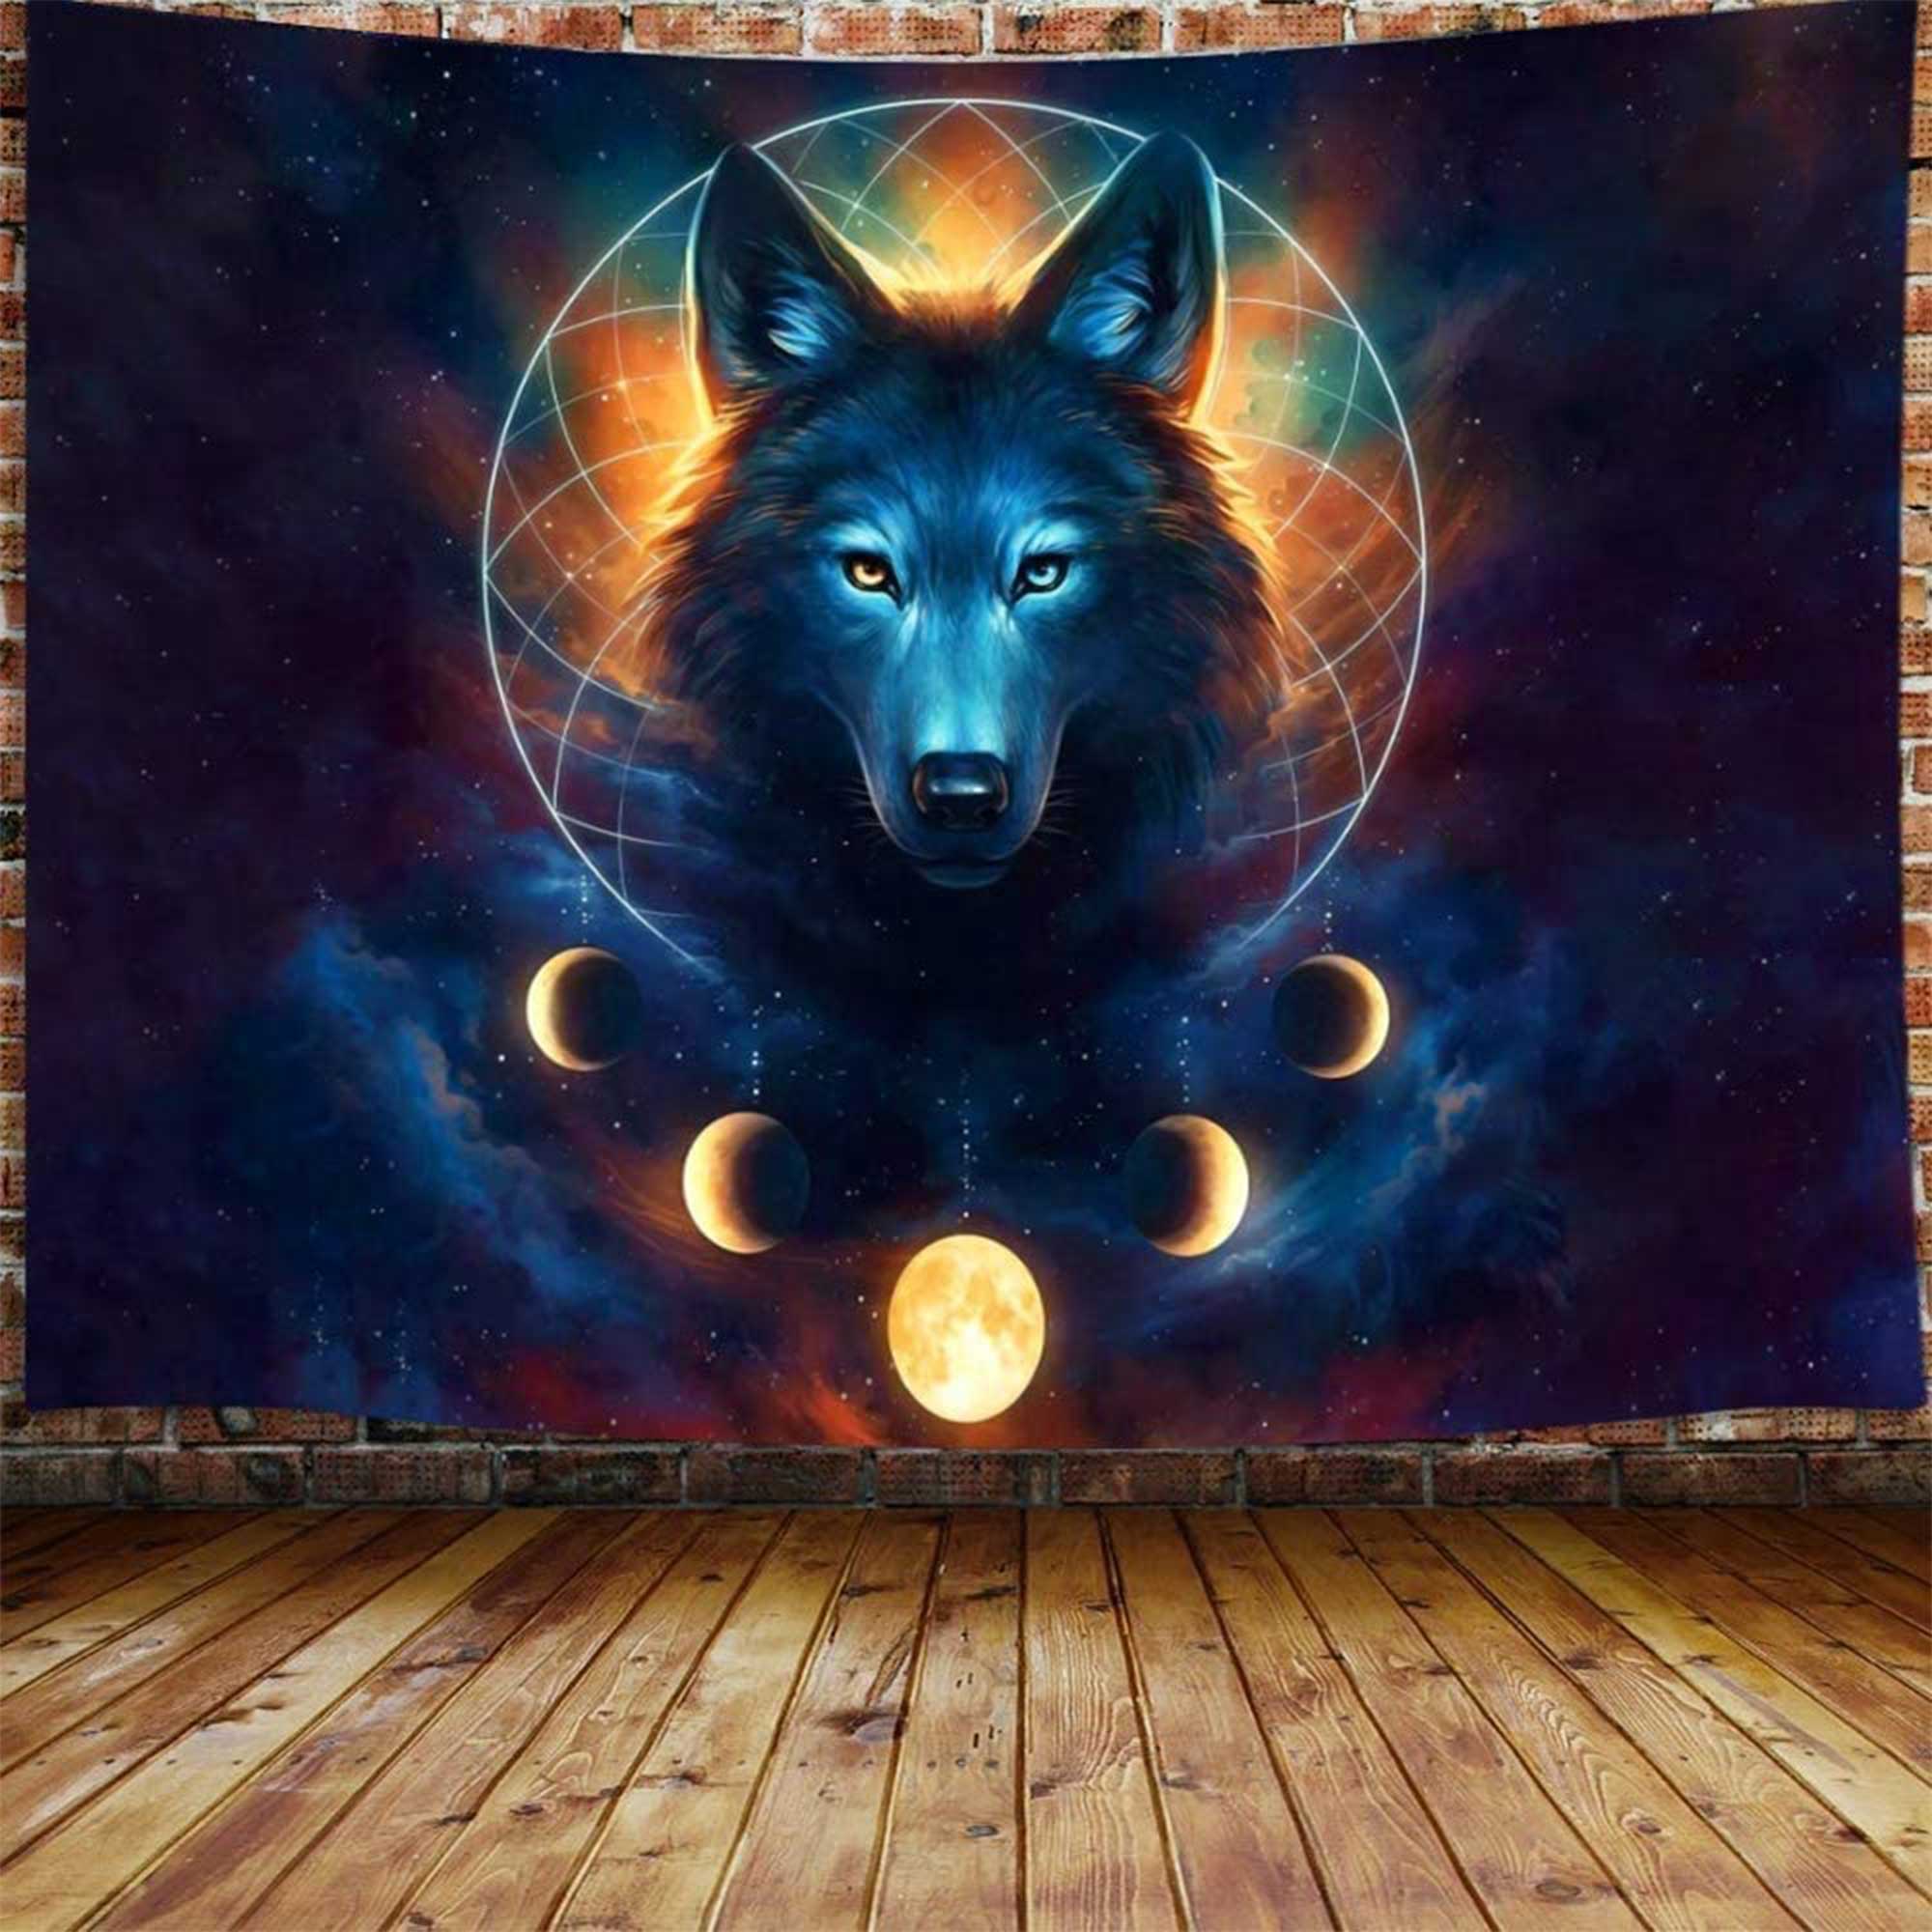 Labyrinth Wolf And Boy 3D Abstract Fantasy Art
 Wallpapers